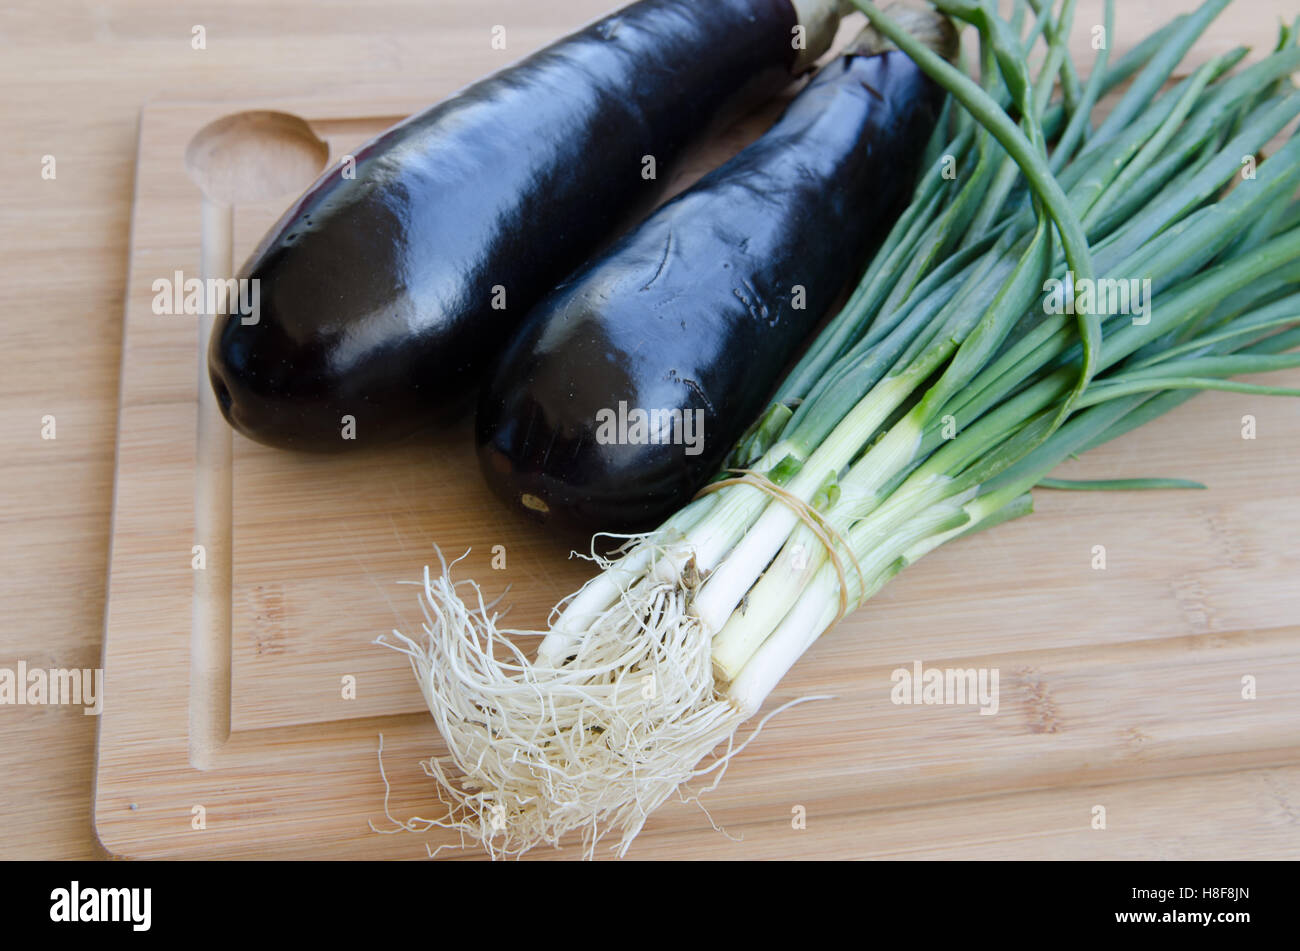 Eggplant with green onions on cutting board Stock Photo